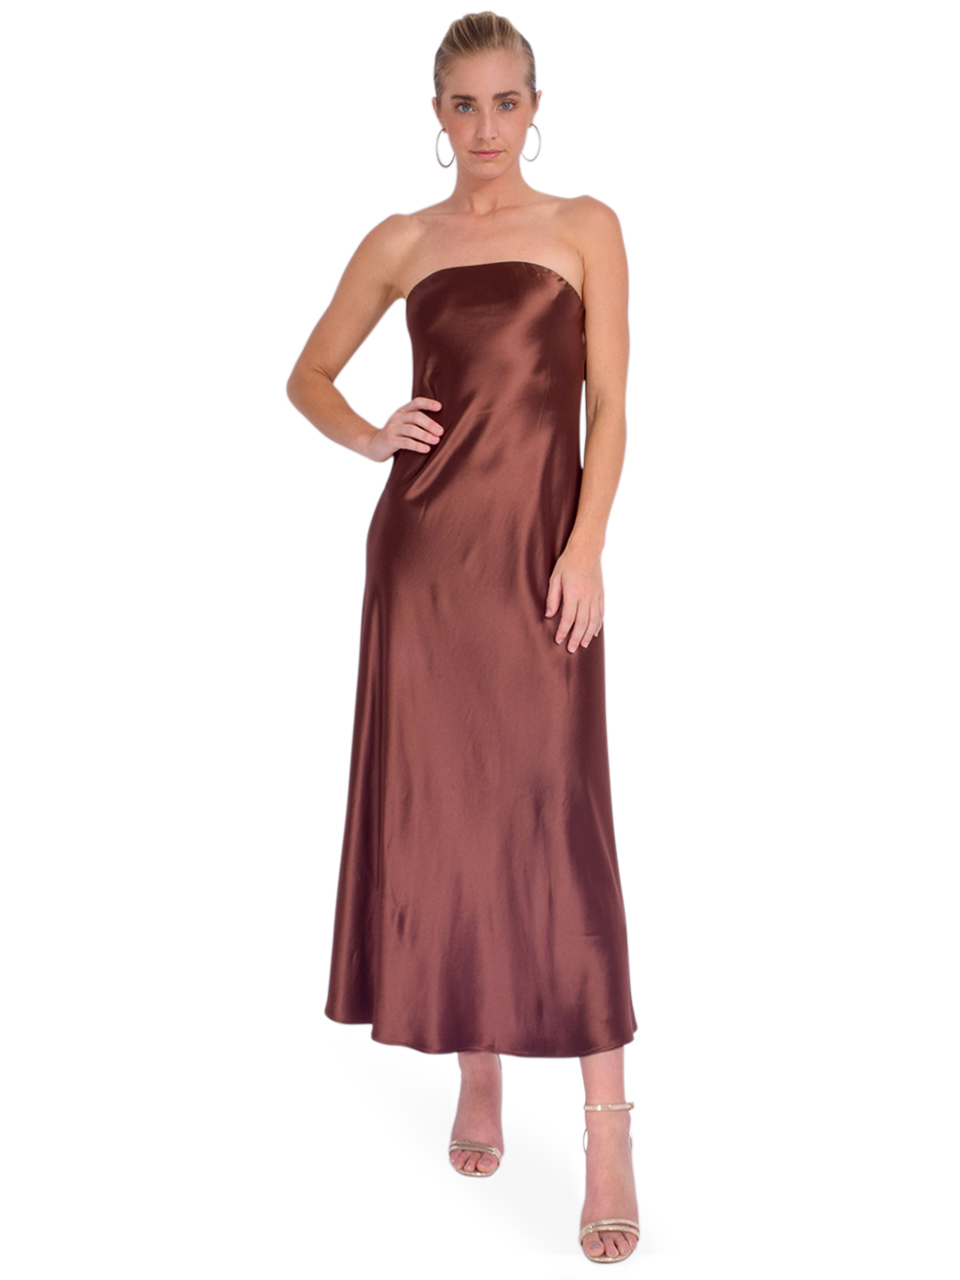 CAMI NYC Noelle Strapless Dress in Coconut Brown Front View 1